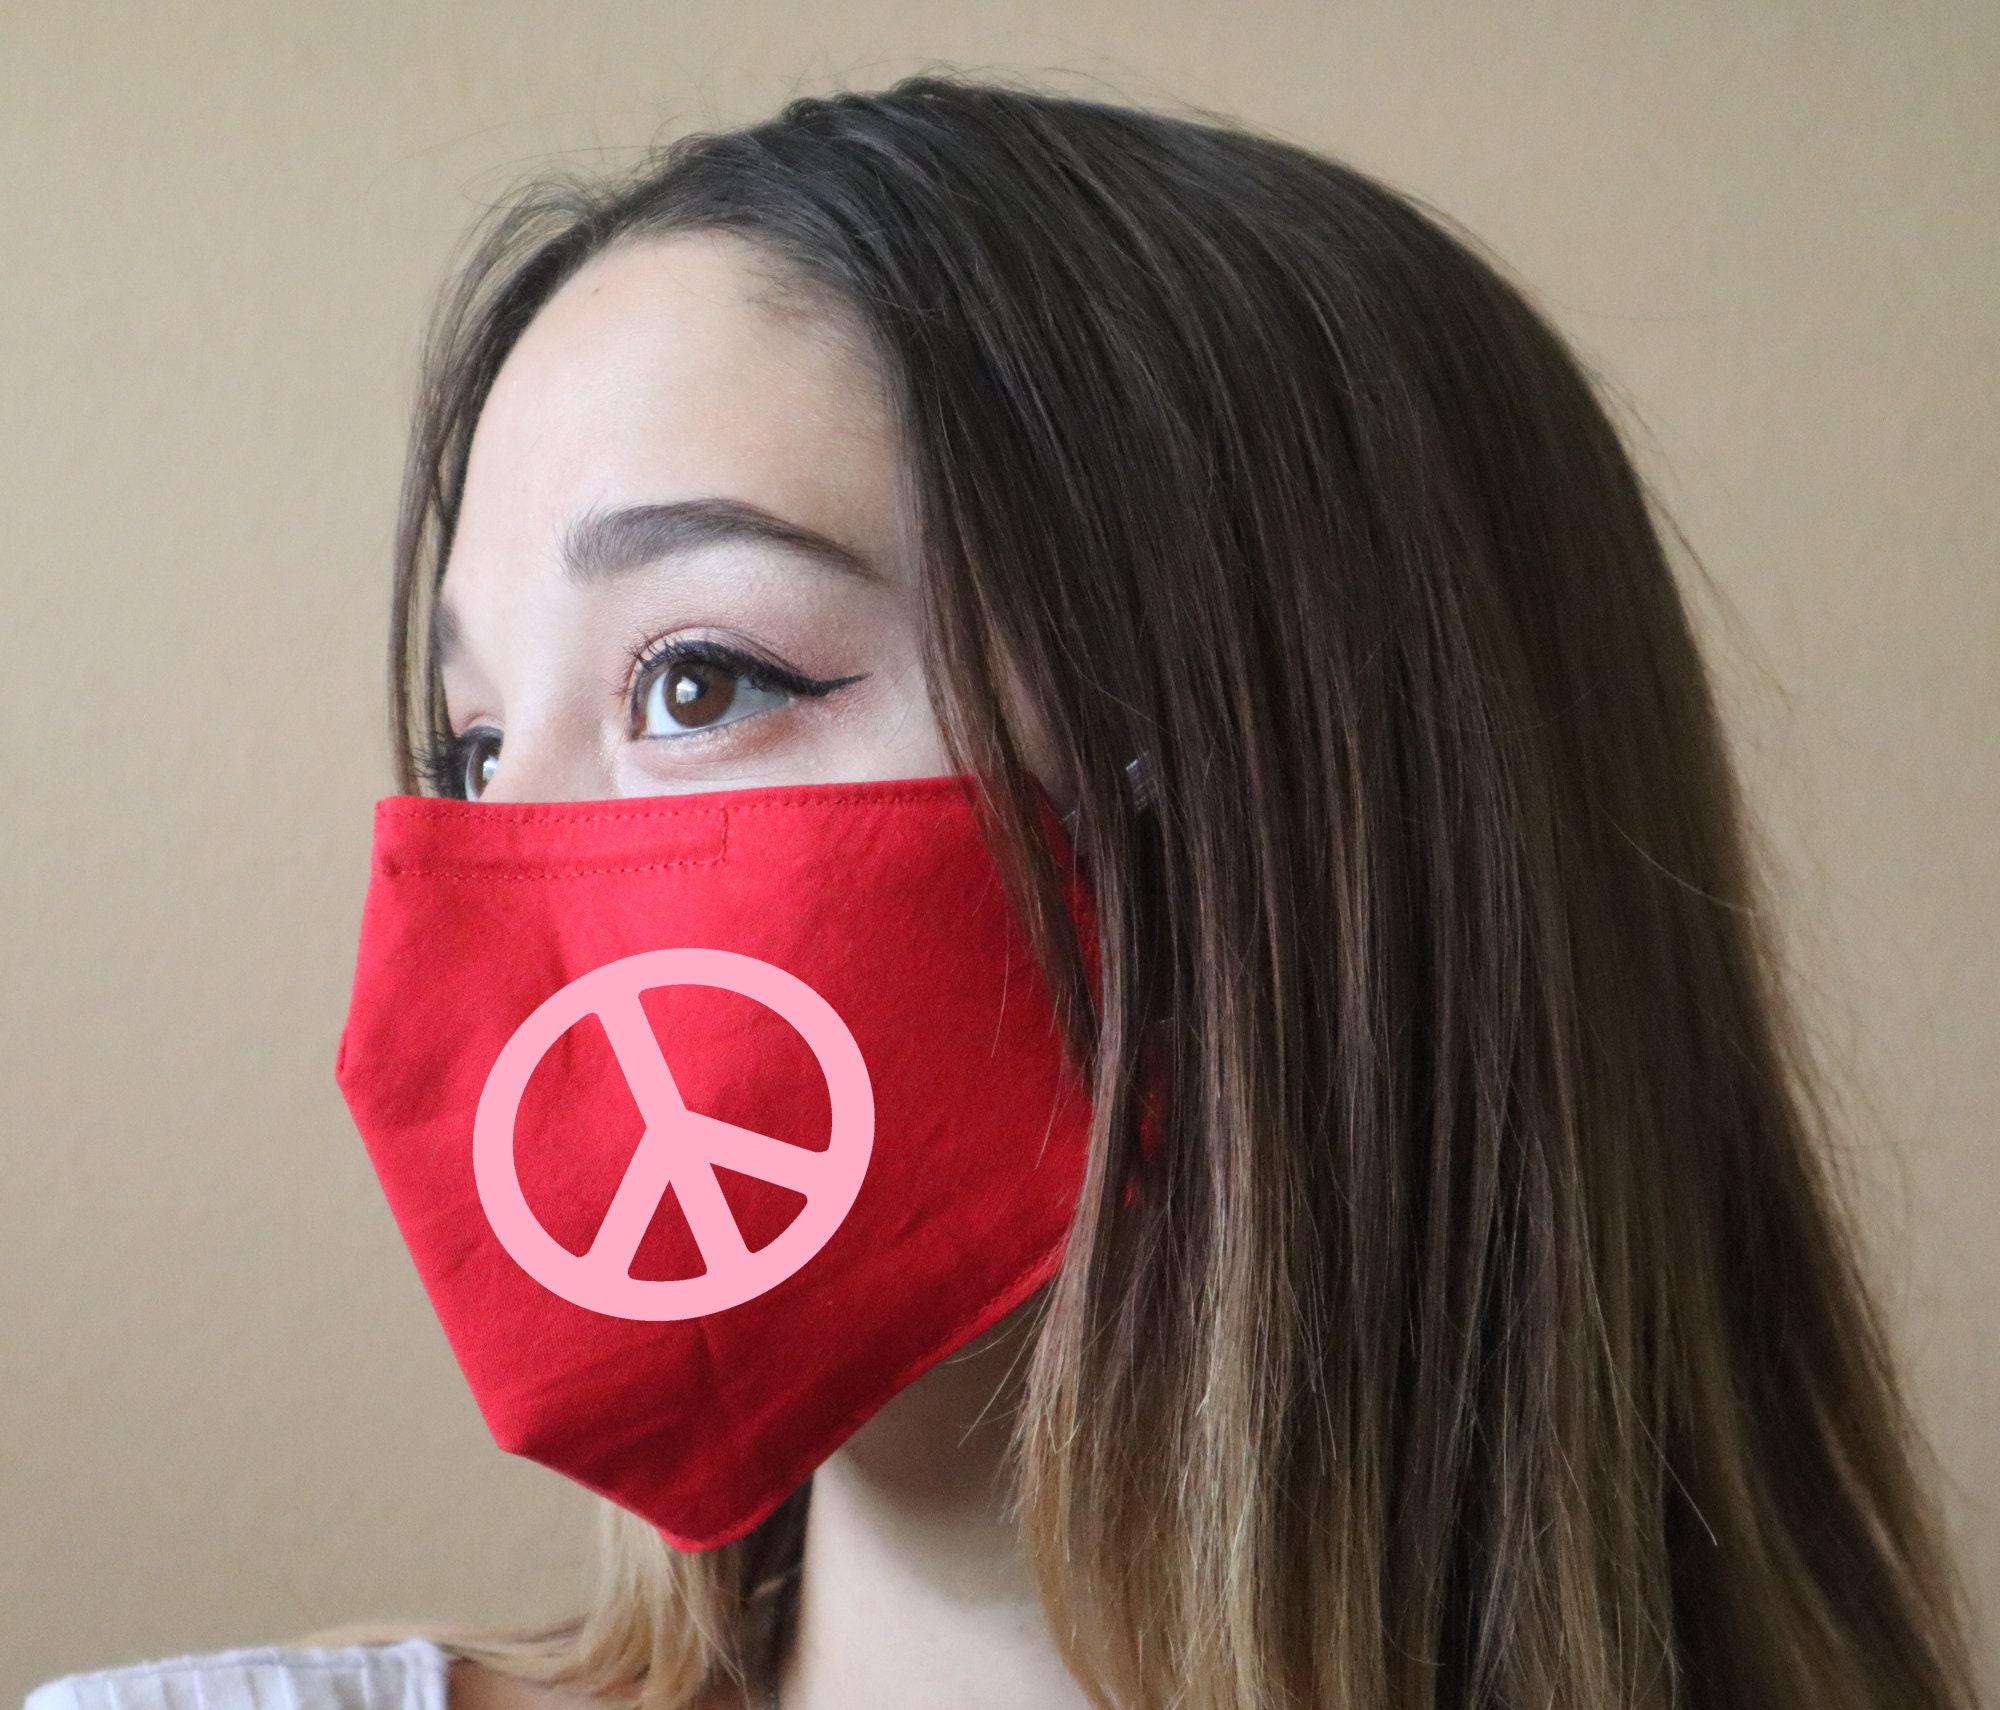 Handmade Cotton Blend Customizable Face Masks With Adjustable Ear-Loops - Peace Adult Small 8 X 5"